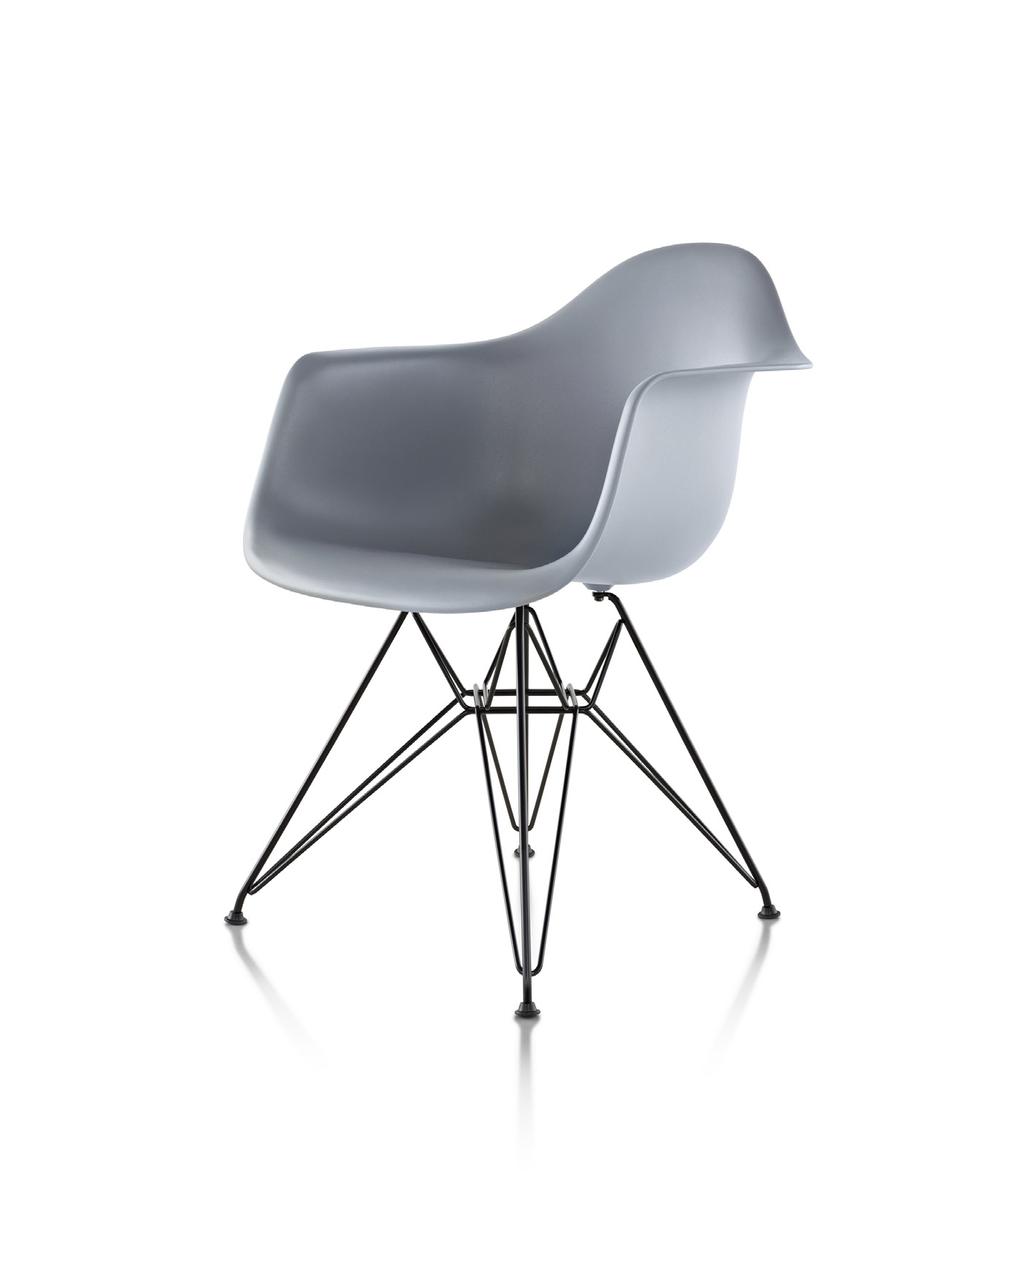 . Eames Molded Plastic Armchair Wire Base Comfortable and lightweight, and updated with modern materials, the clean, simple form of Charles and Ray Eames original 1948 design